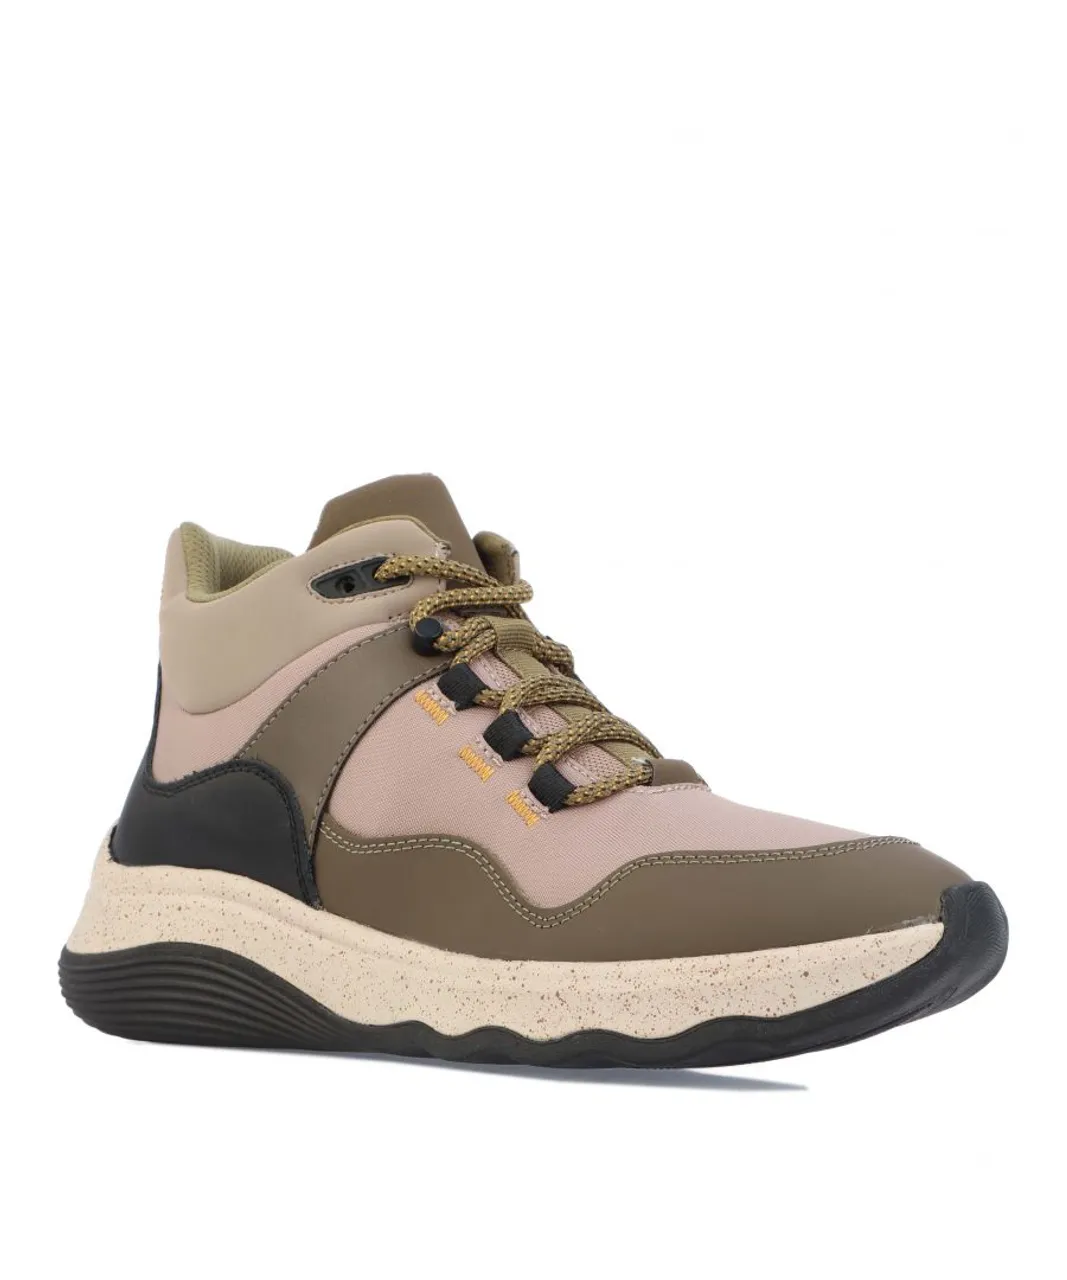 Clarks Womenss Jaunt Lo Boots in olive Leather (archived)